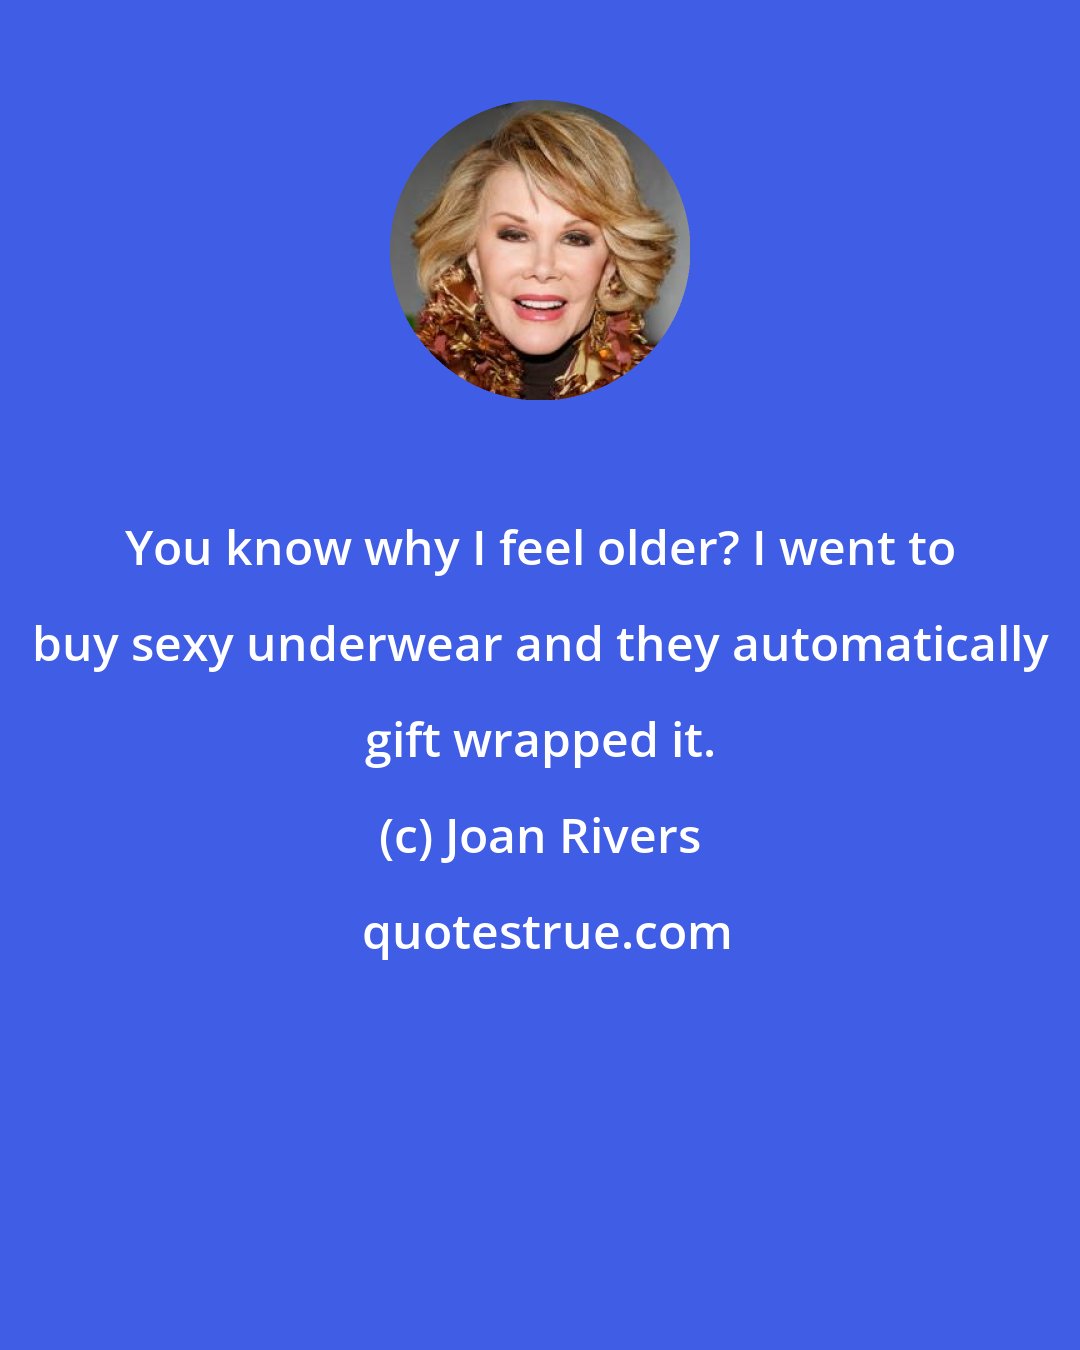 Joan Rivers: You know why I feel older? I went to buy sexy underwear and they automatically gift wrapped it.